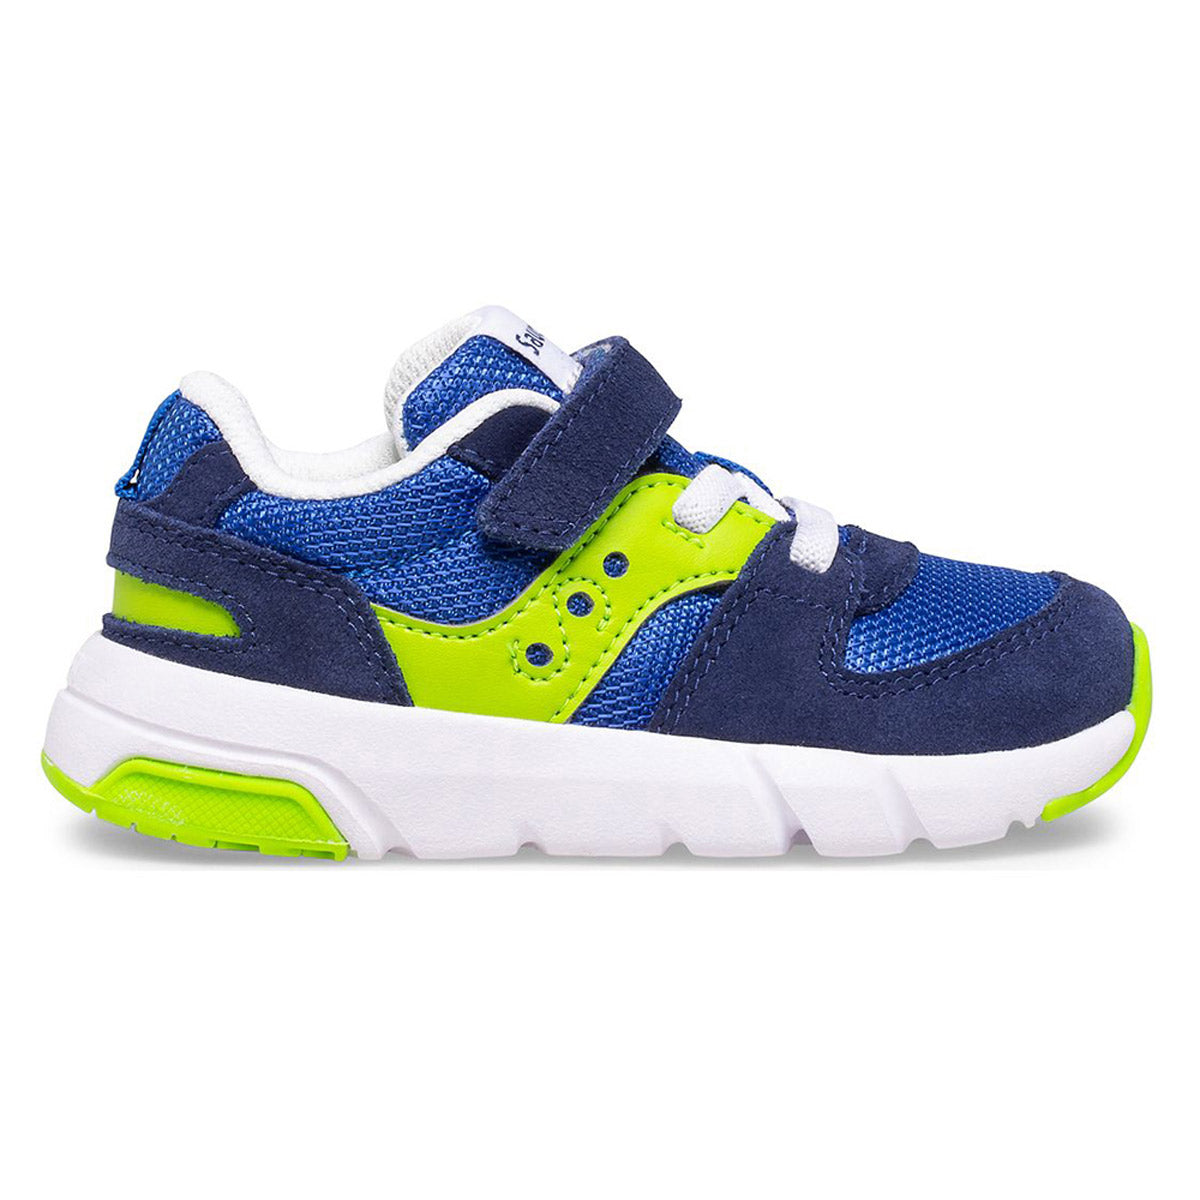 A child's blue and lime green Saucony Jazz Lite 2.0 sneaker with hook and loop fasteners.